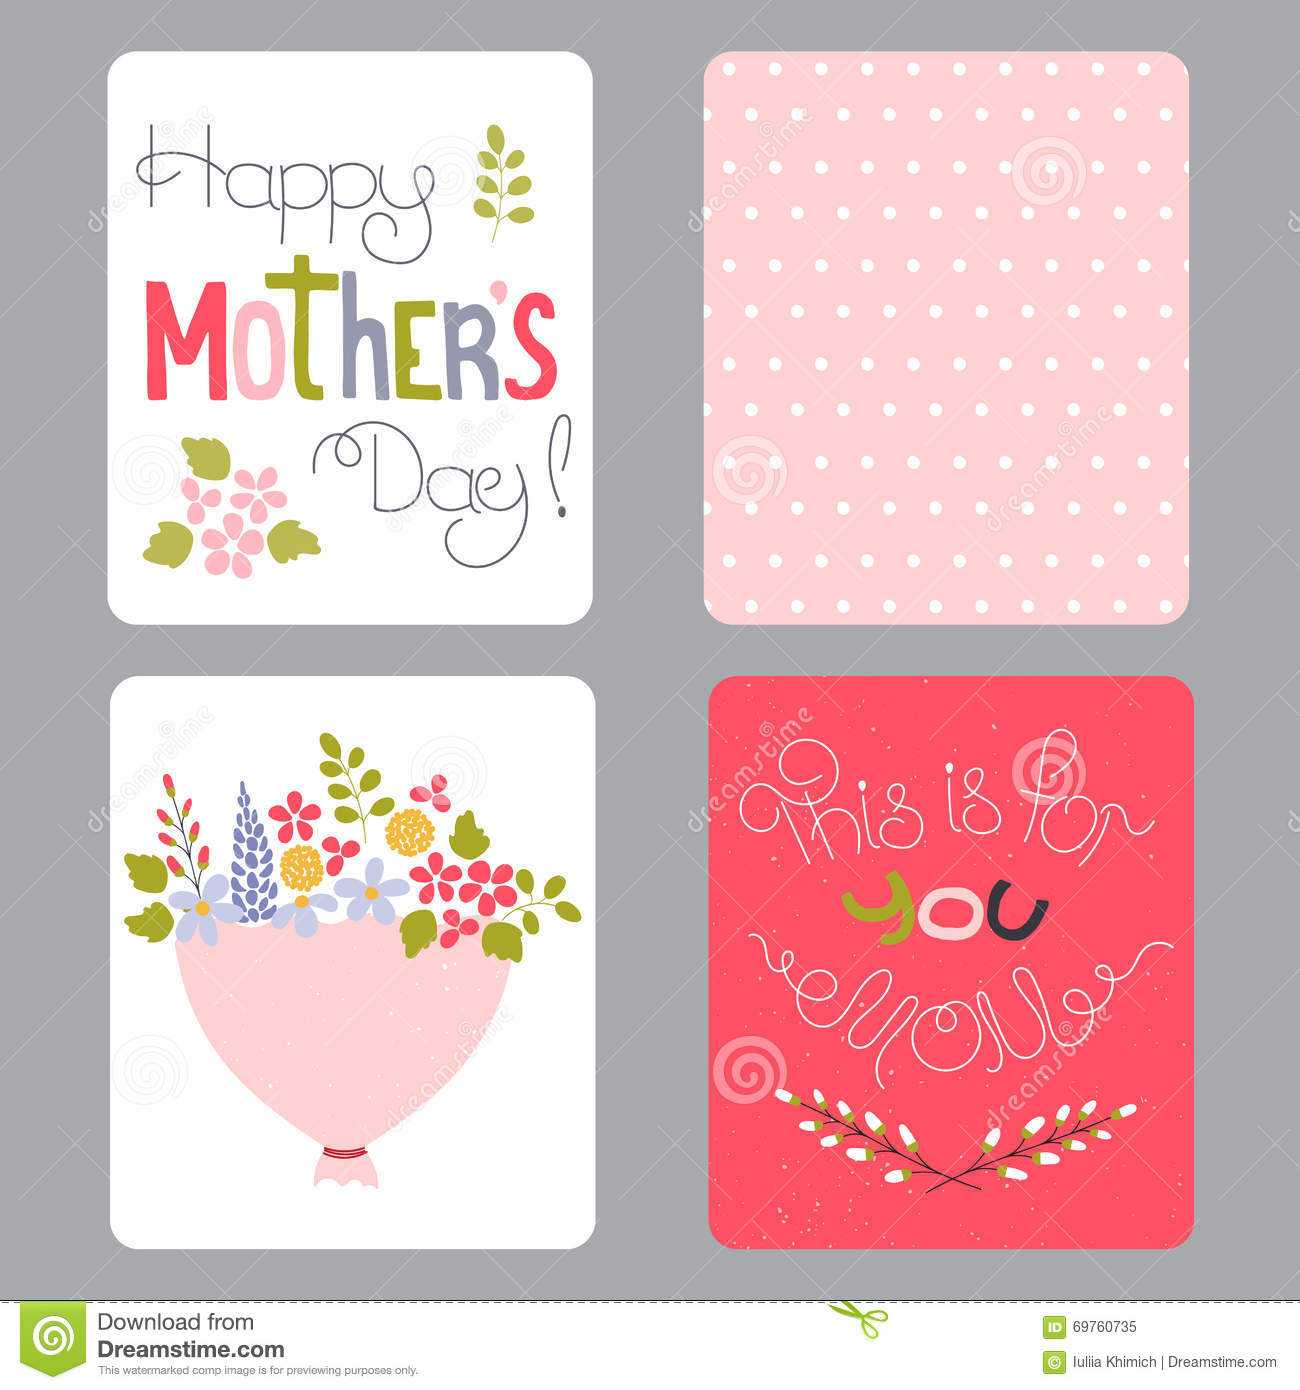 Mothers Day Set Of Cards Stock Vector. Illustration Of Party Regarding Small Greeting Card Template